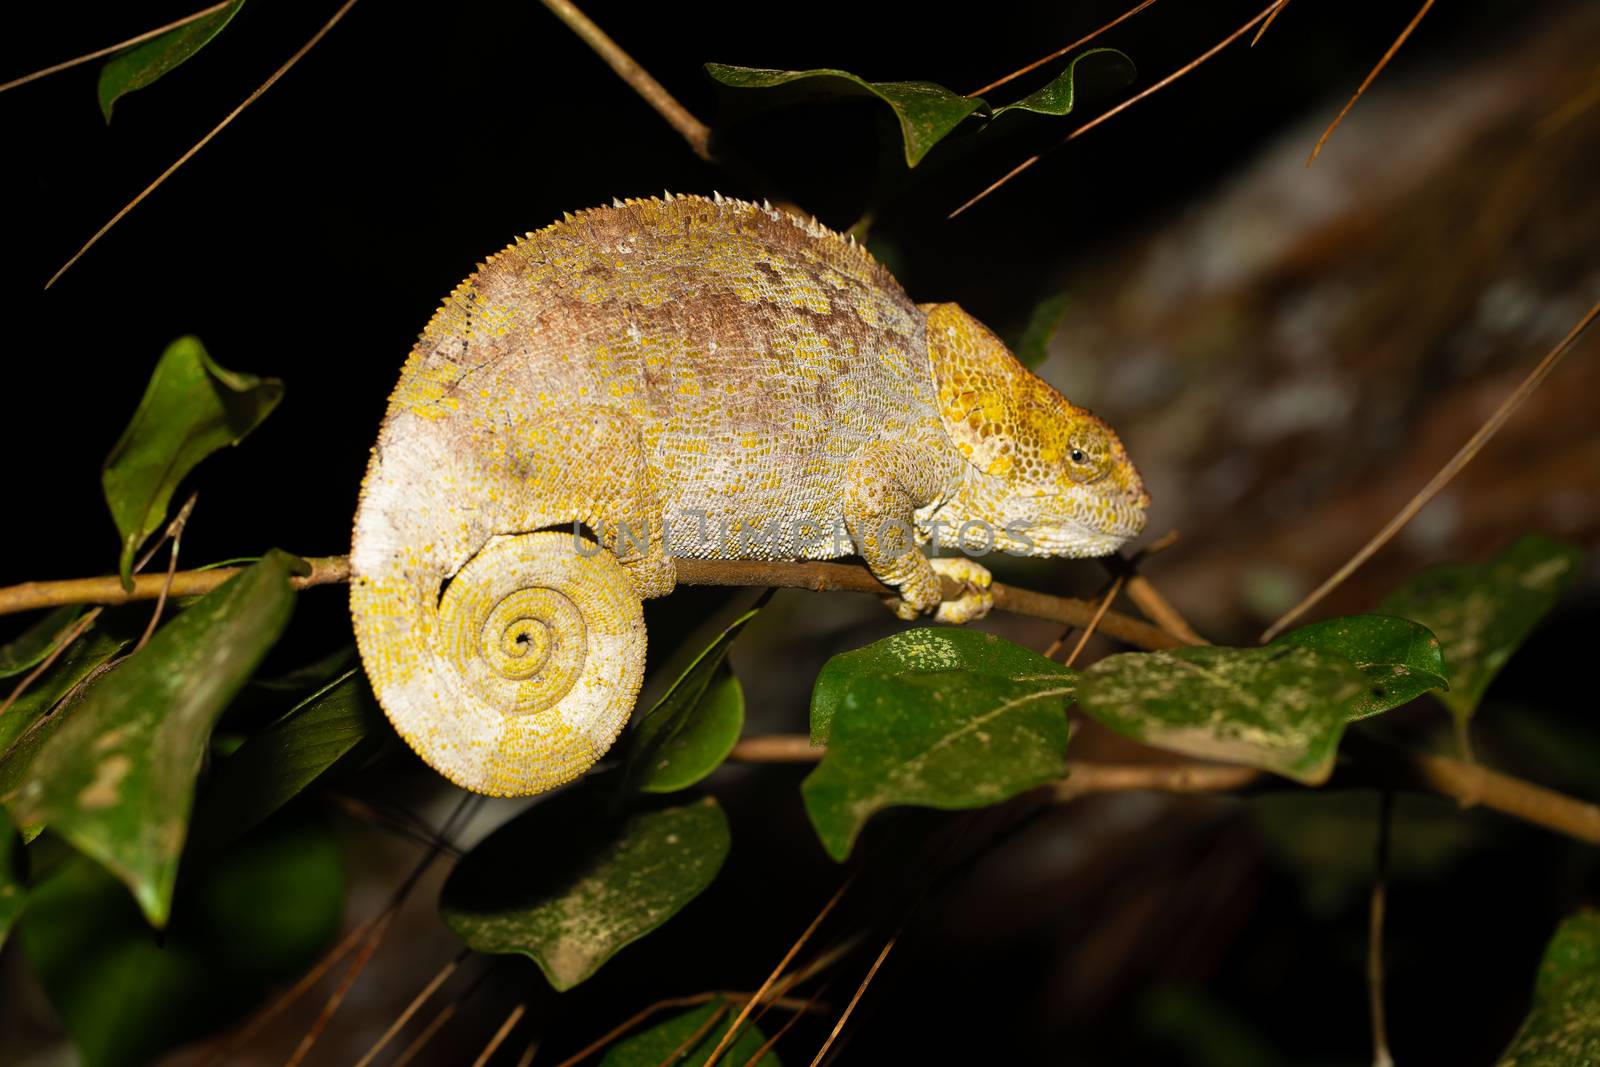 One chameleon on a branch with green leaves